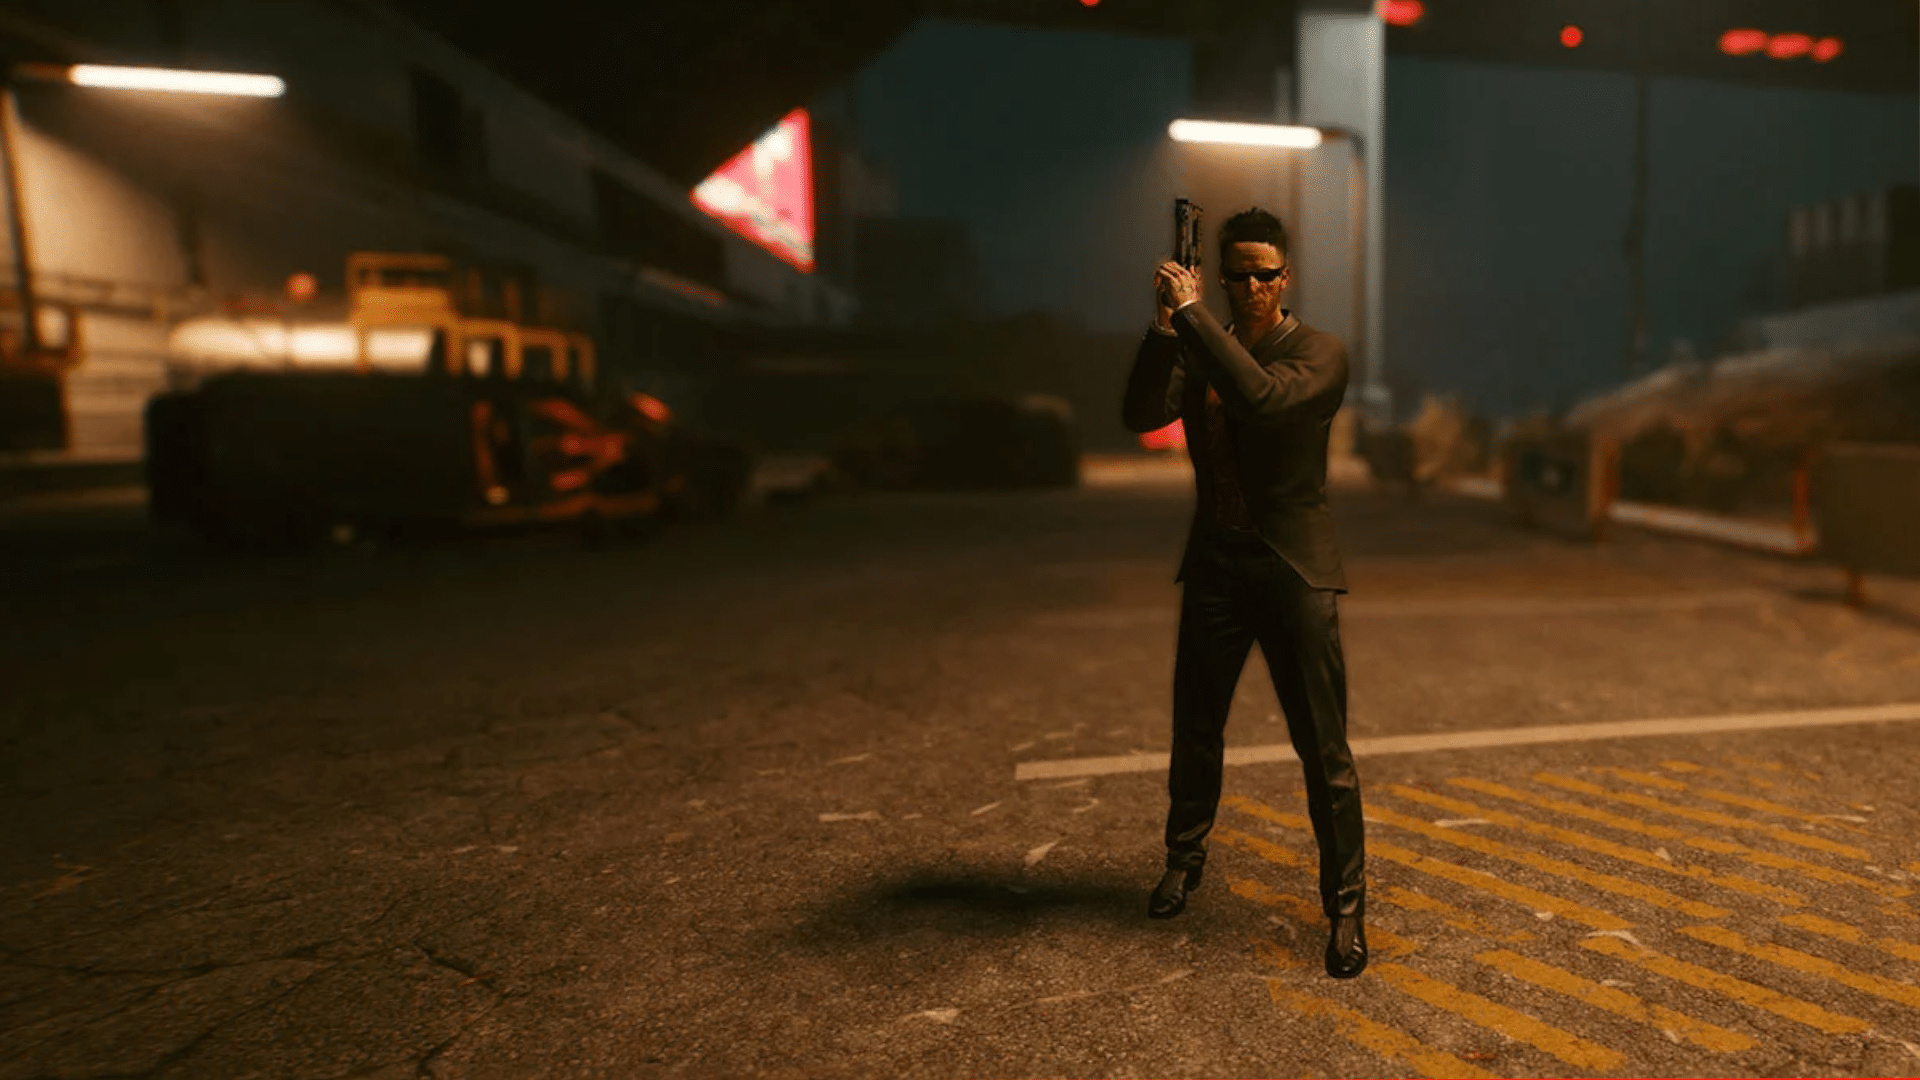 How To Get The Legendary Corpo Suit Set in Cyberpunk 2077